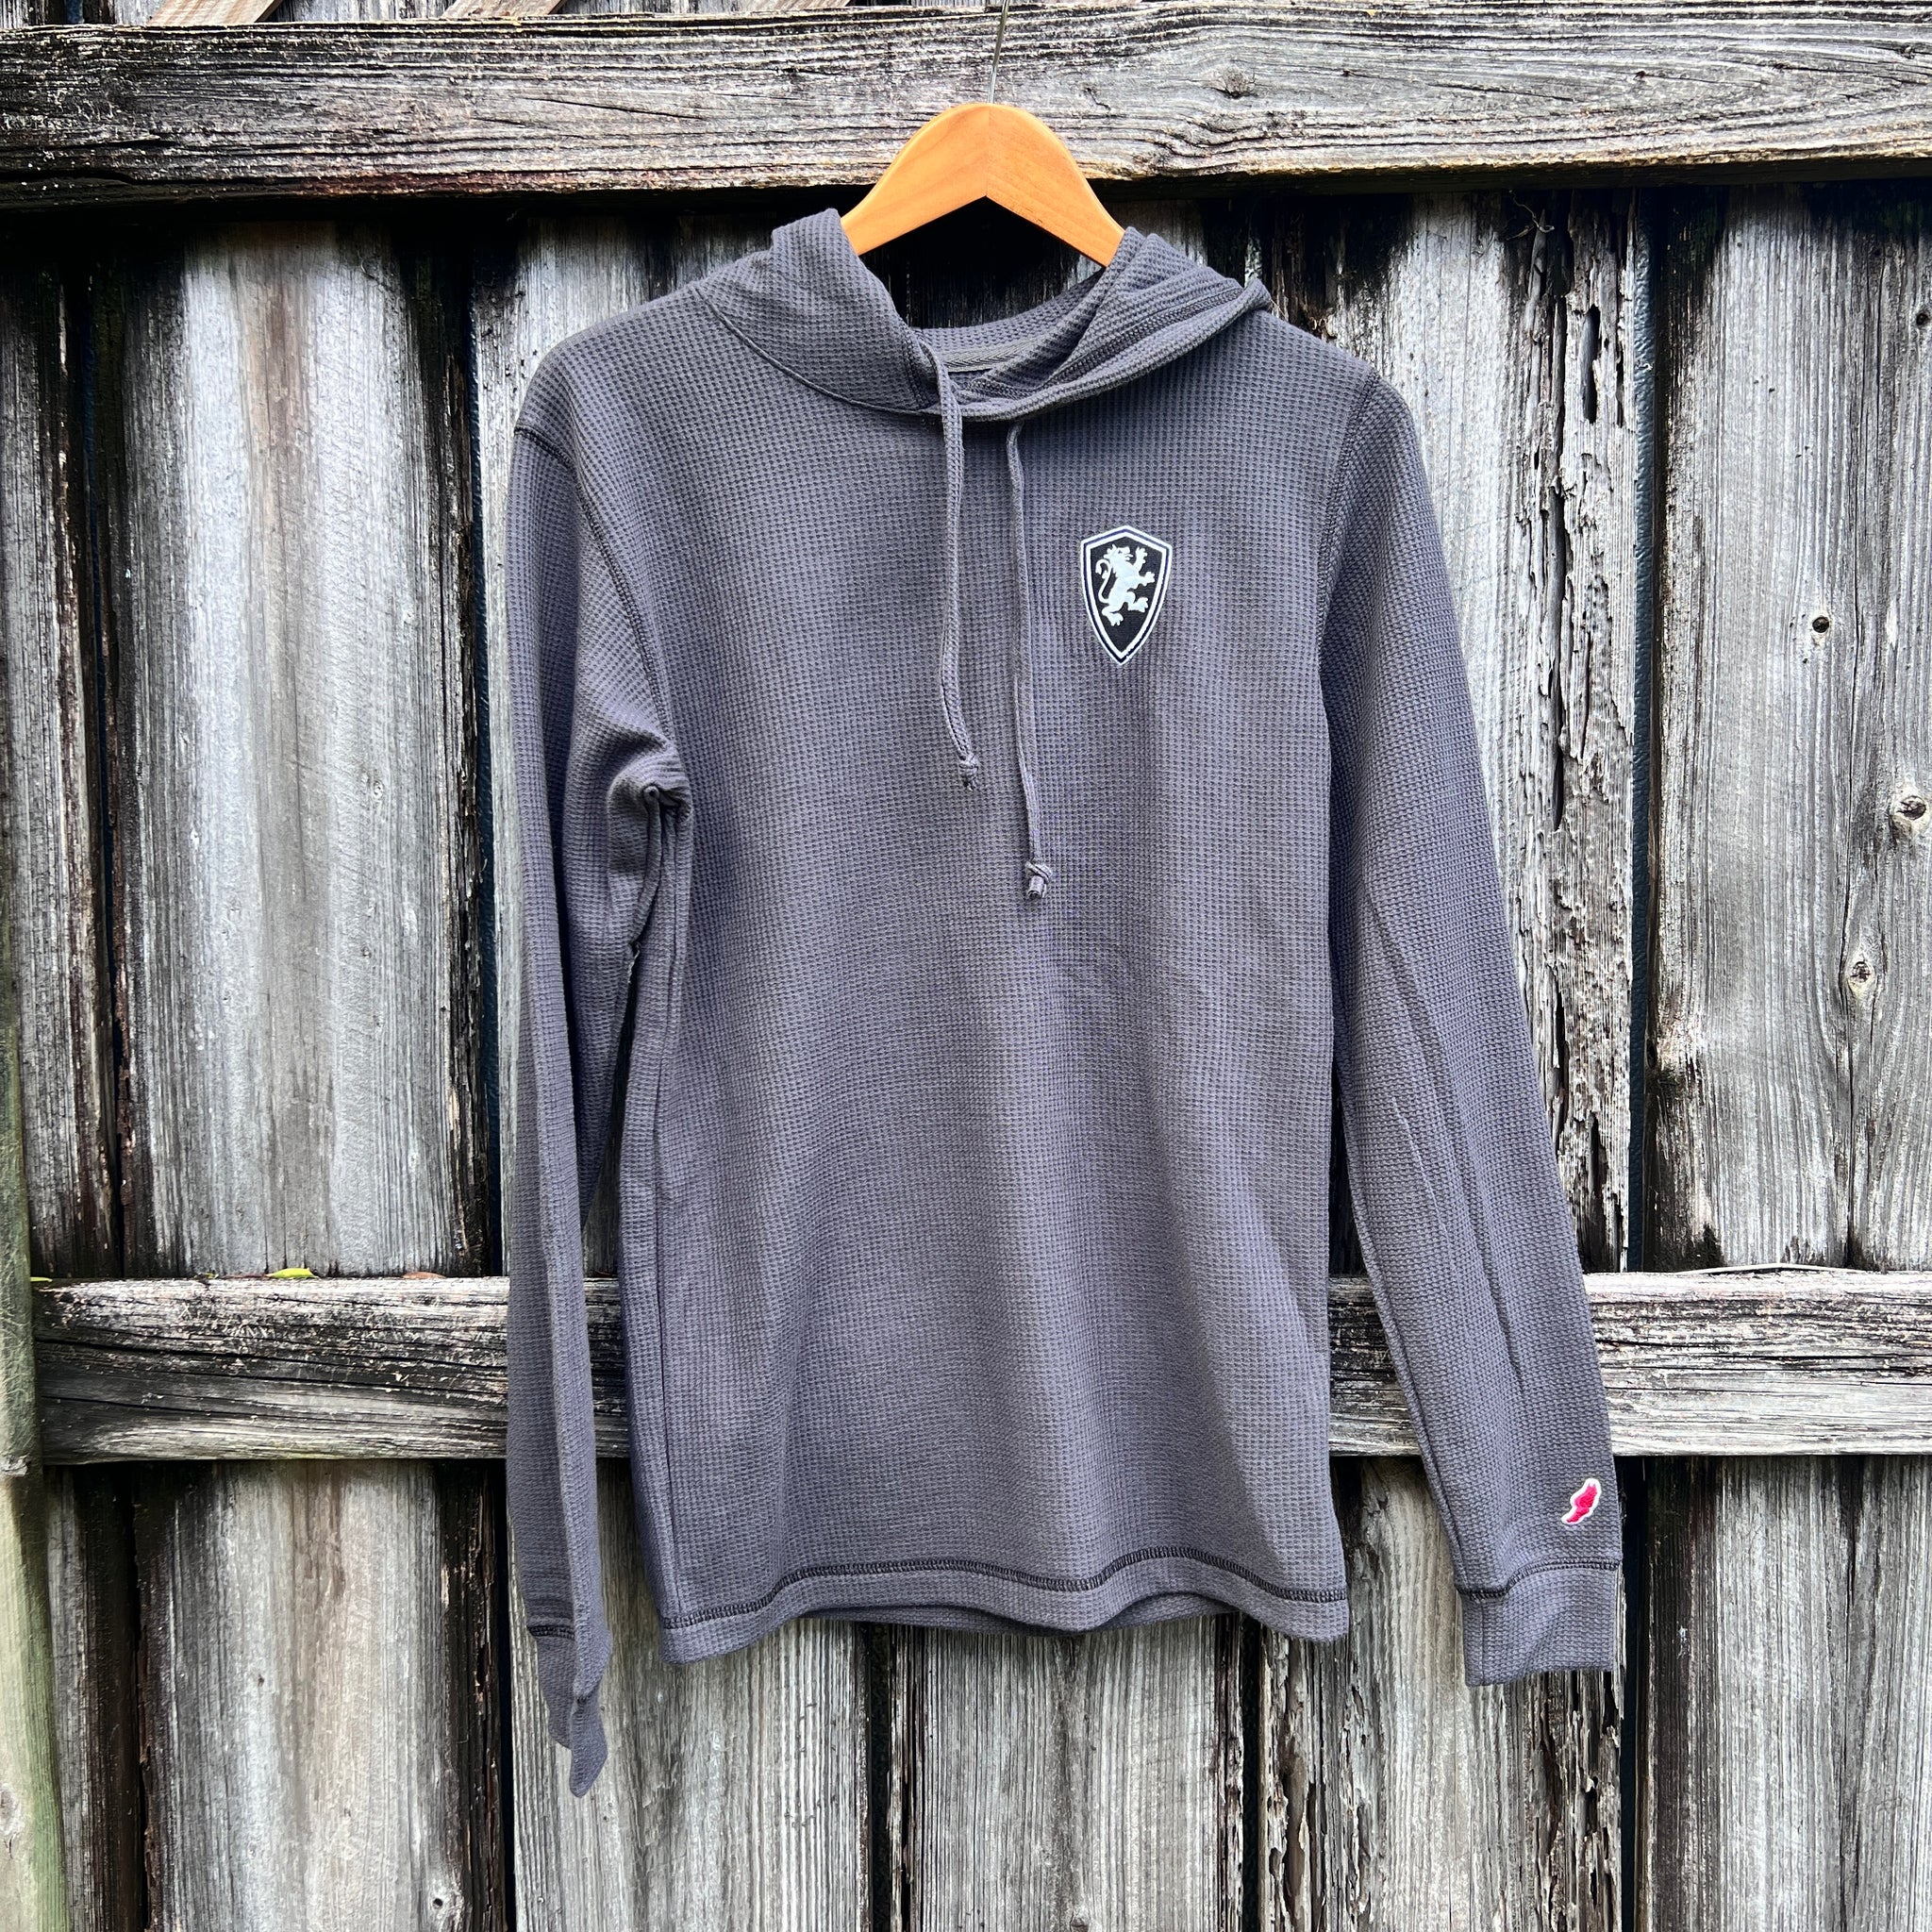 Charcoal hooded sweatshirt with waffle texture and black Flagler College shield logo on left side